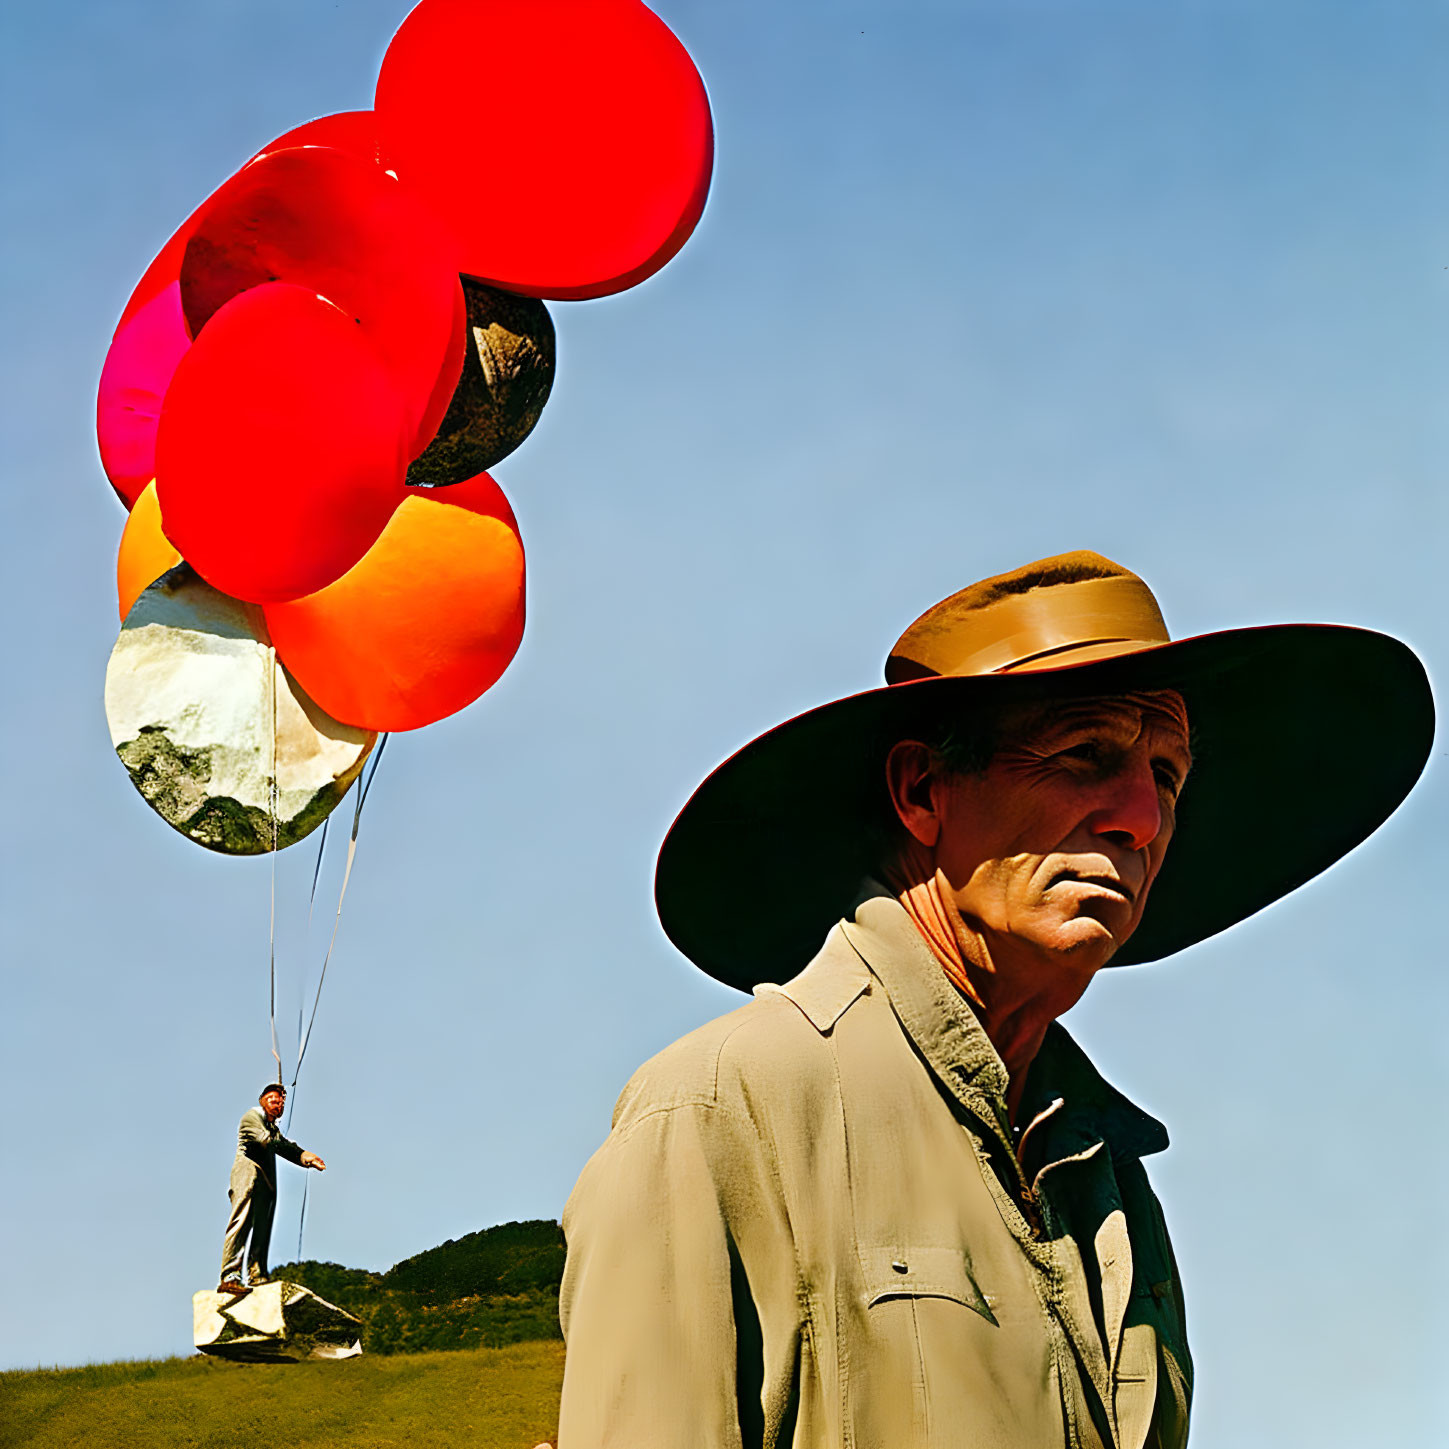 Two men in beige jacket and hat against blue sky, one pensive, other holding colorful balloons.